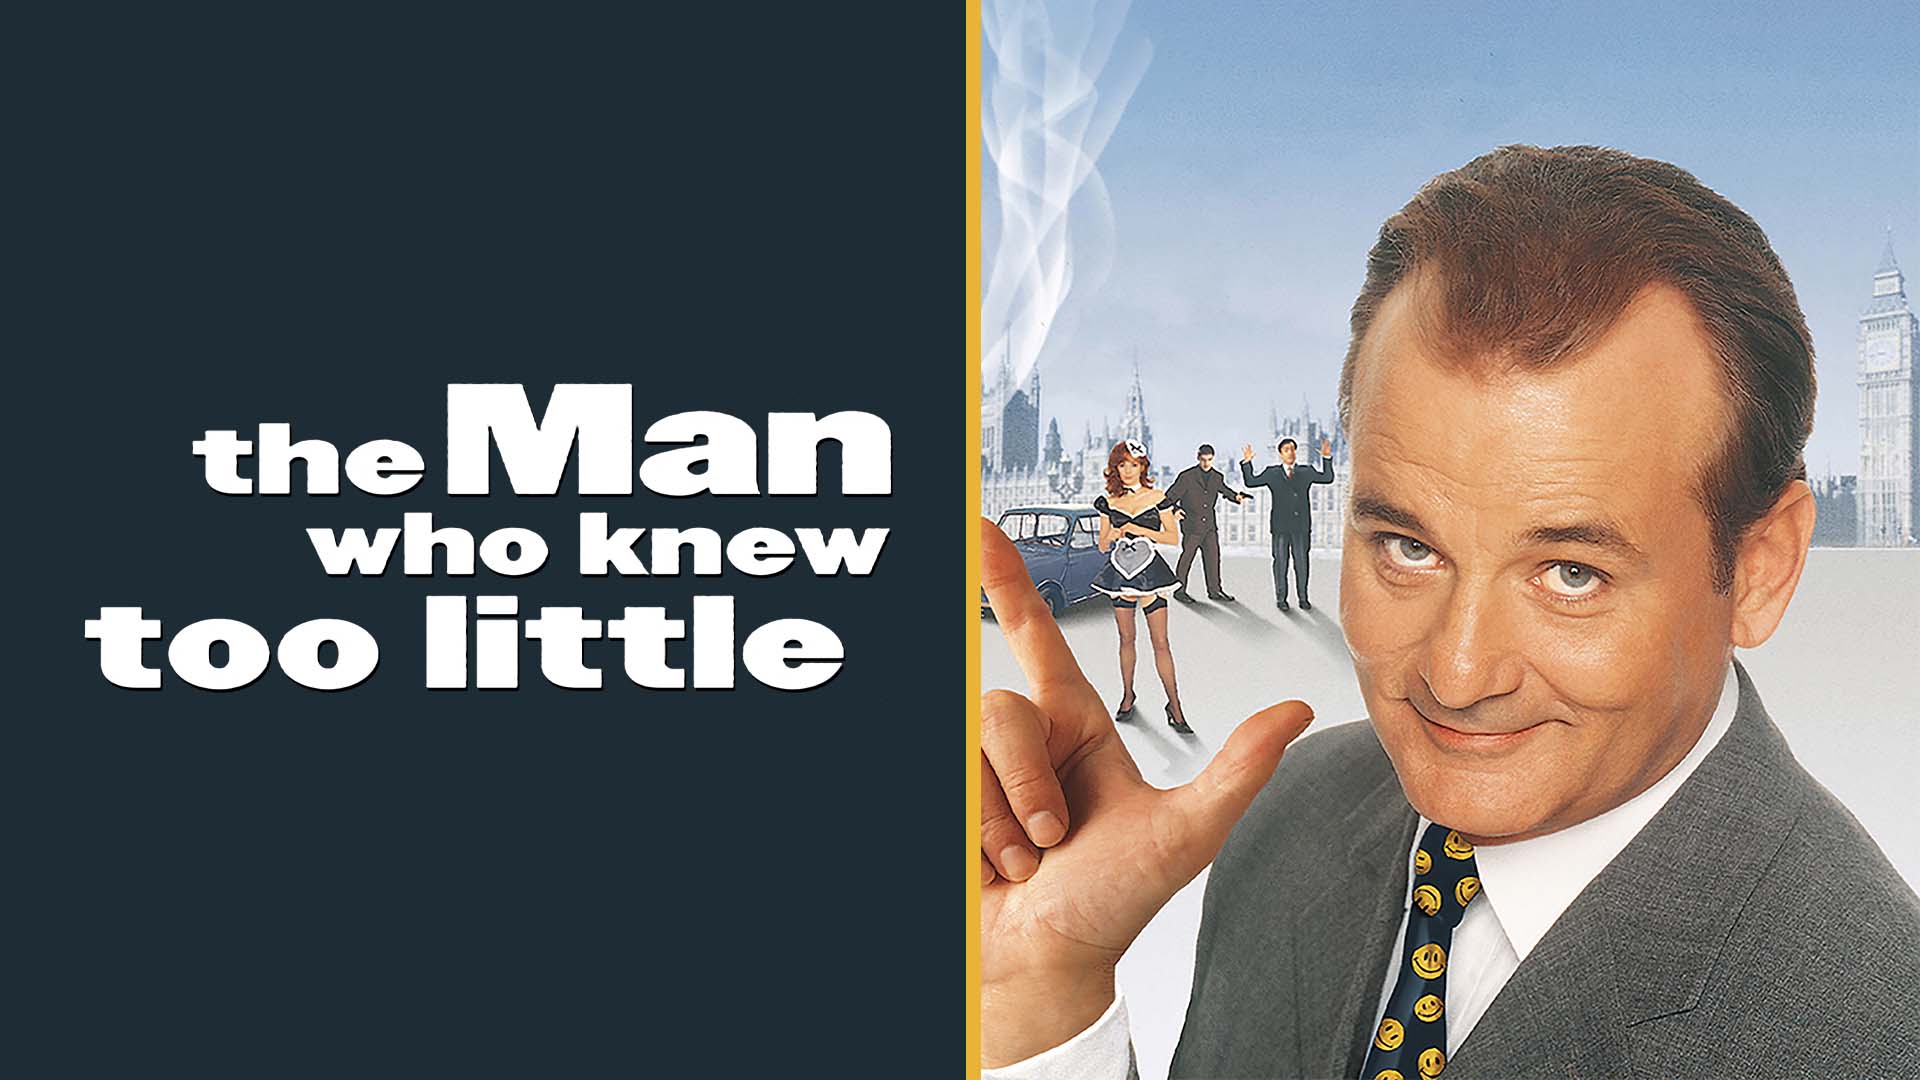 49-facts-about-the-movie-the-man-who-knew-too-little